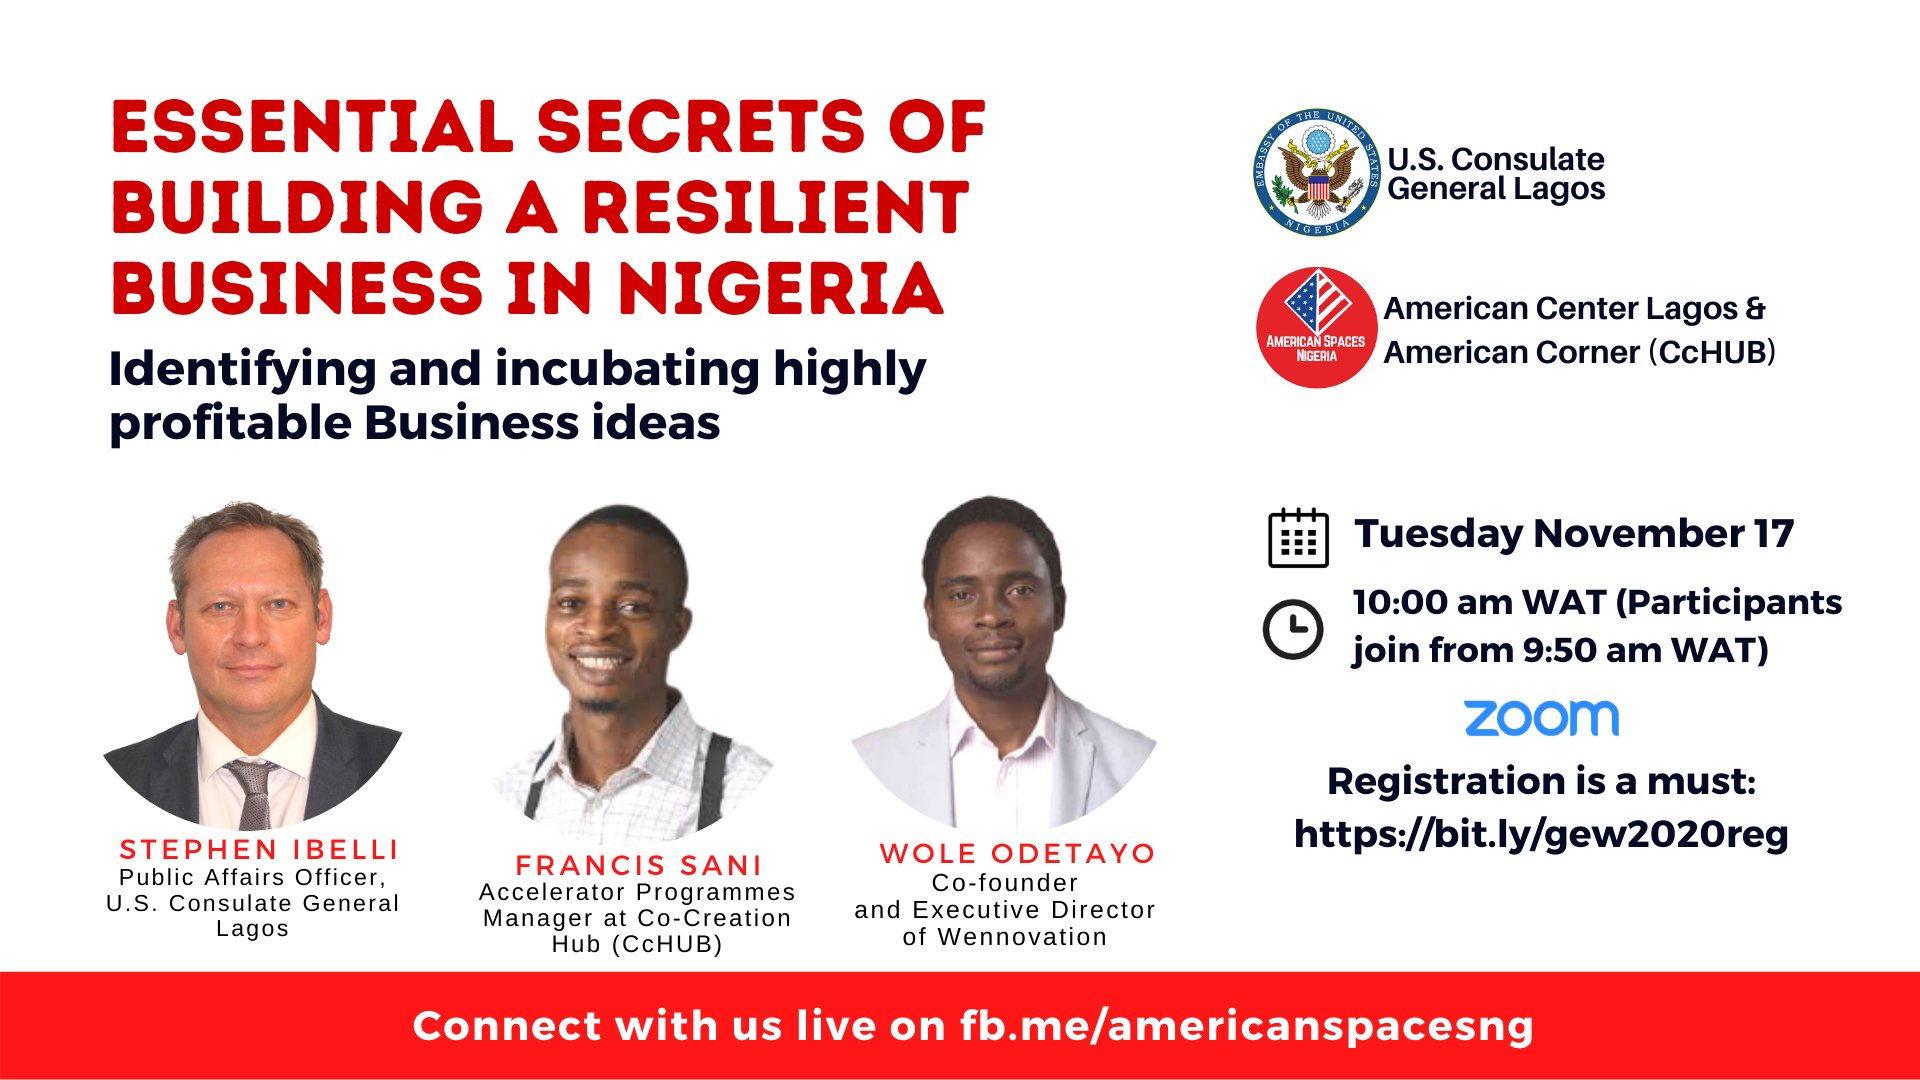 U.S. Mission Nigeria on X: "Are you interested in launching your business?  Join us as we discuss the "Essential Secrets of Building a Resilient  Business in Nigeria". We will be live on